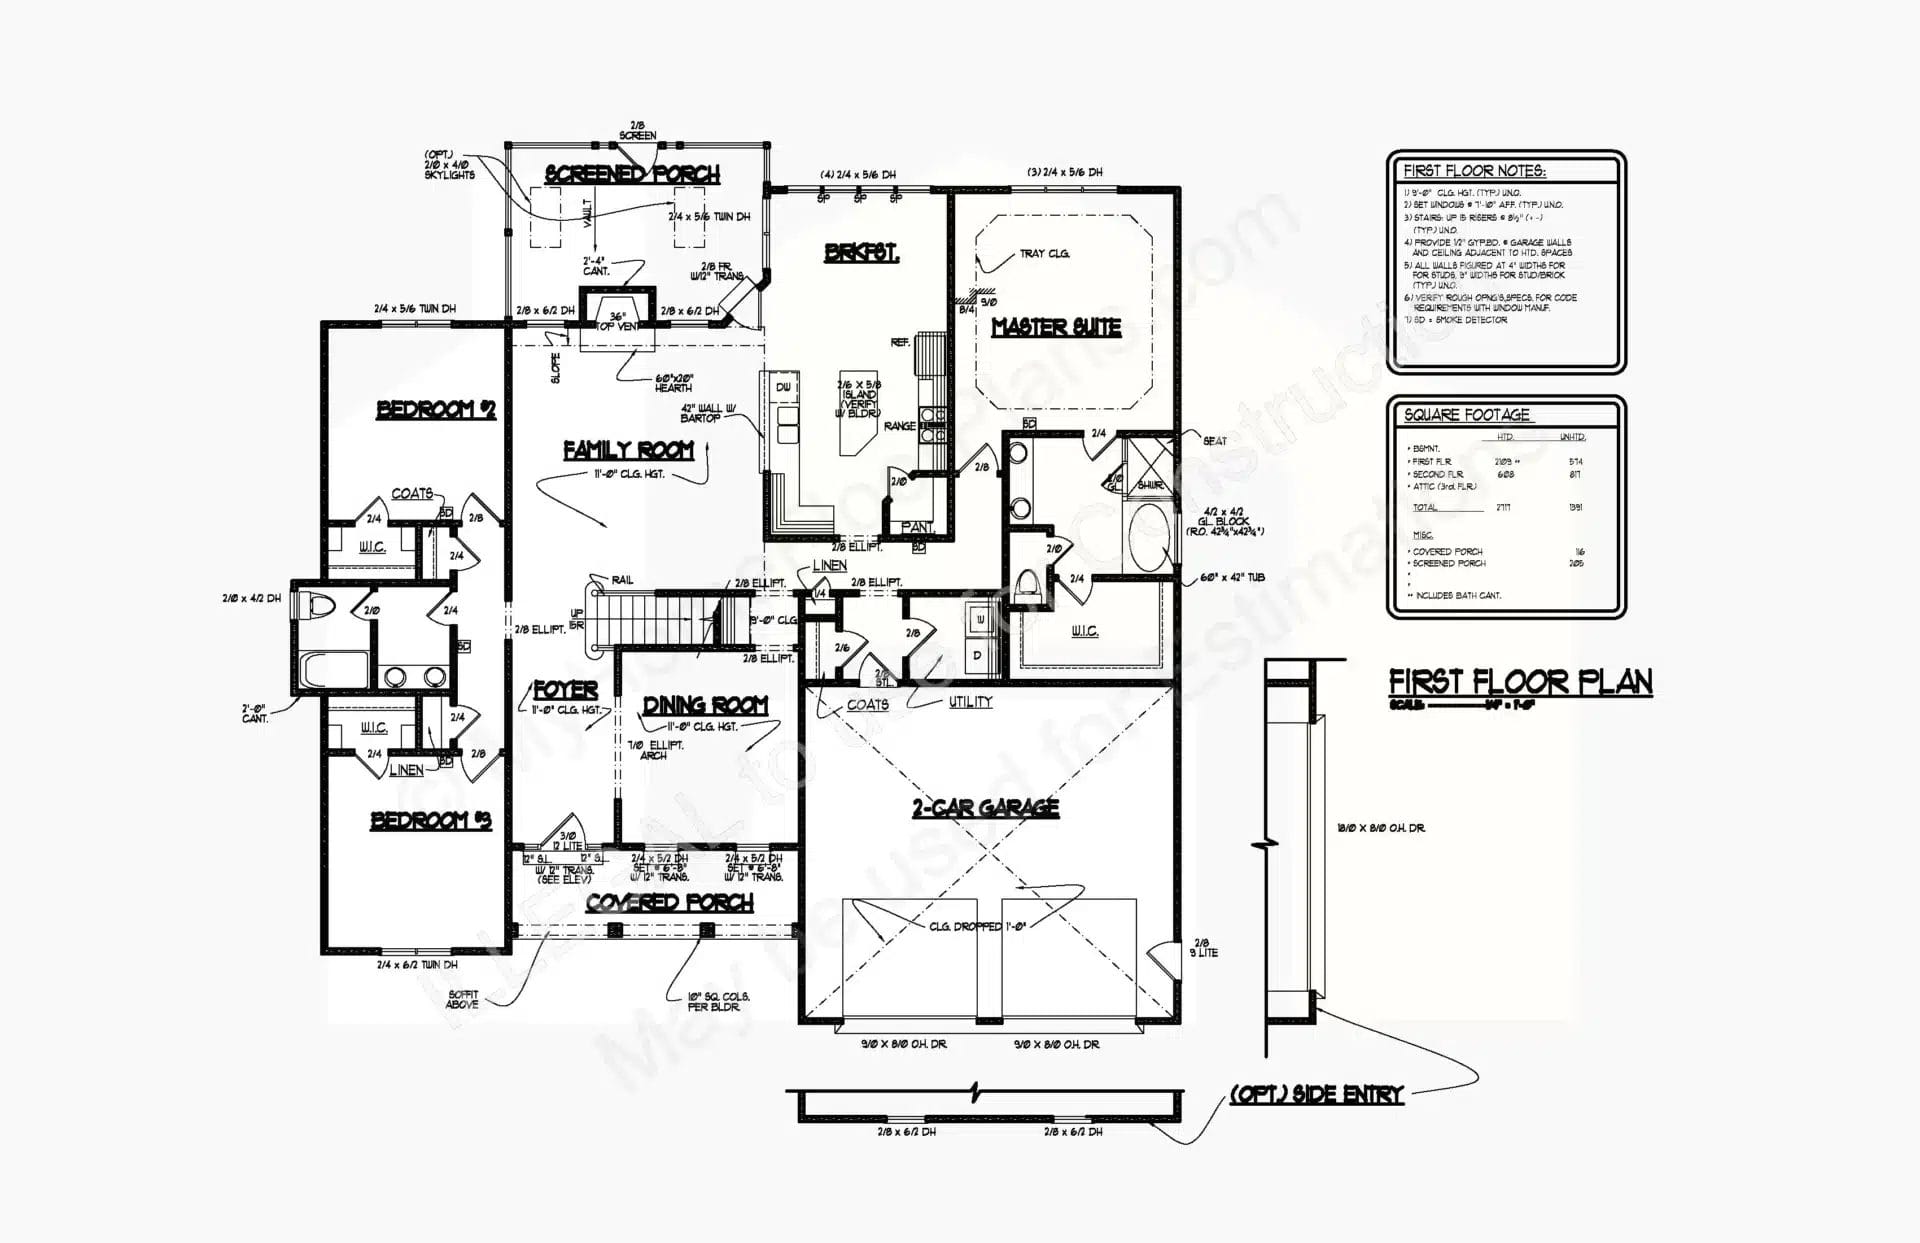 Architectural blueprint of a 12-2289 two-story home's first floor plan. The detailed layout includes labeled rooms such as a master suite, kitchen, and garage, along with doors, windows, and stairs indications.